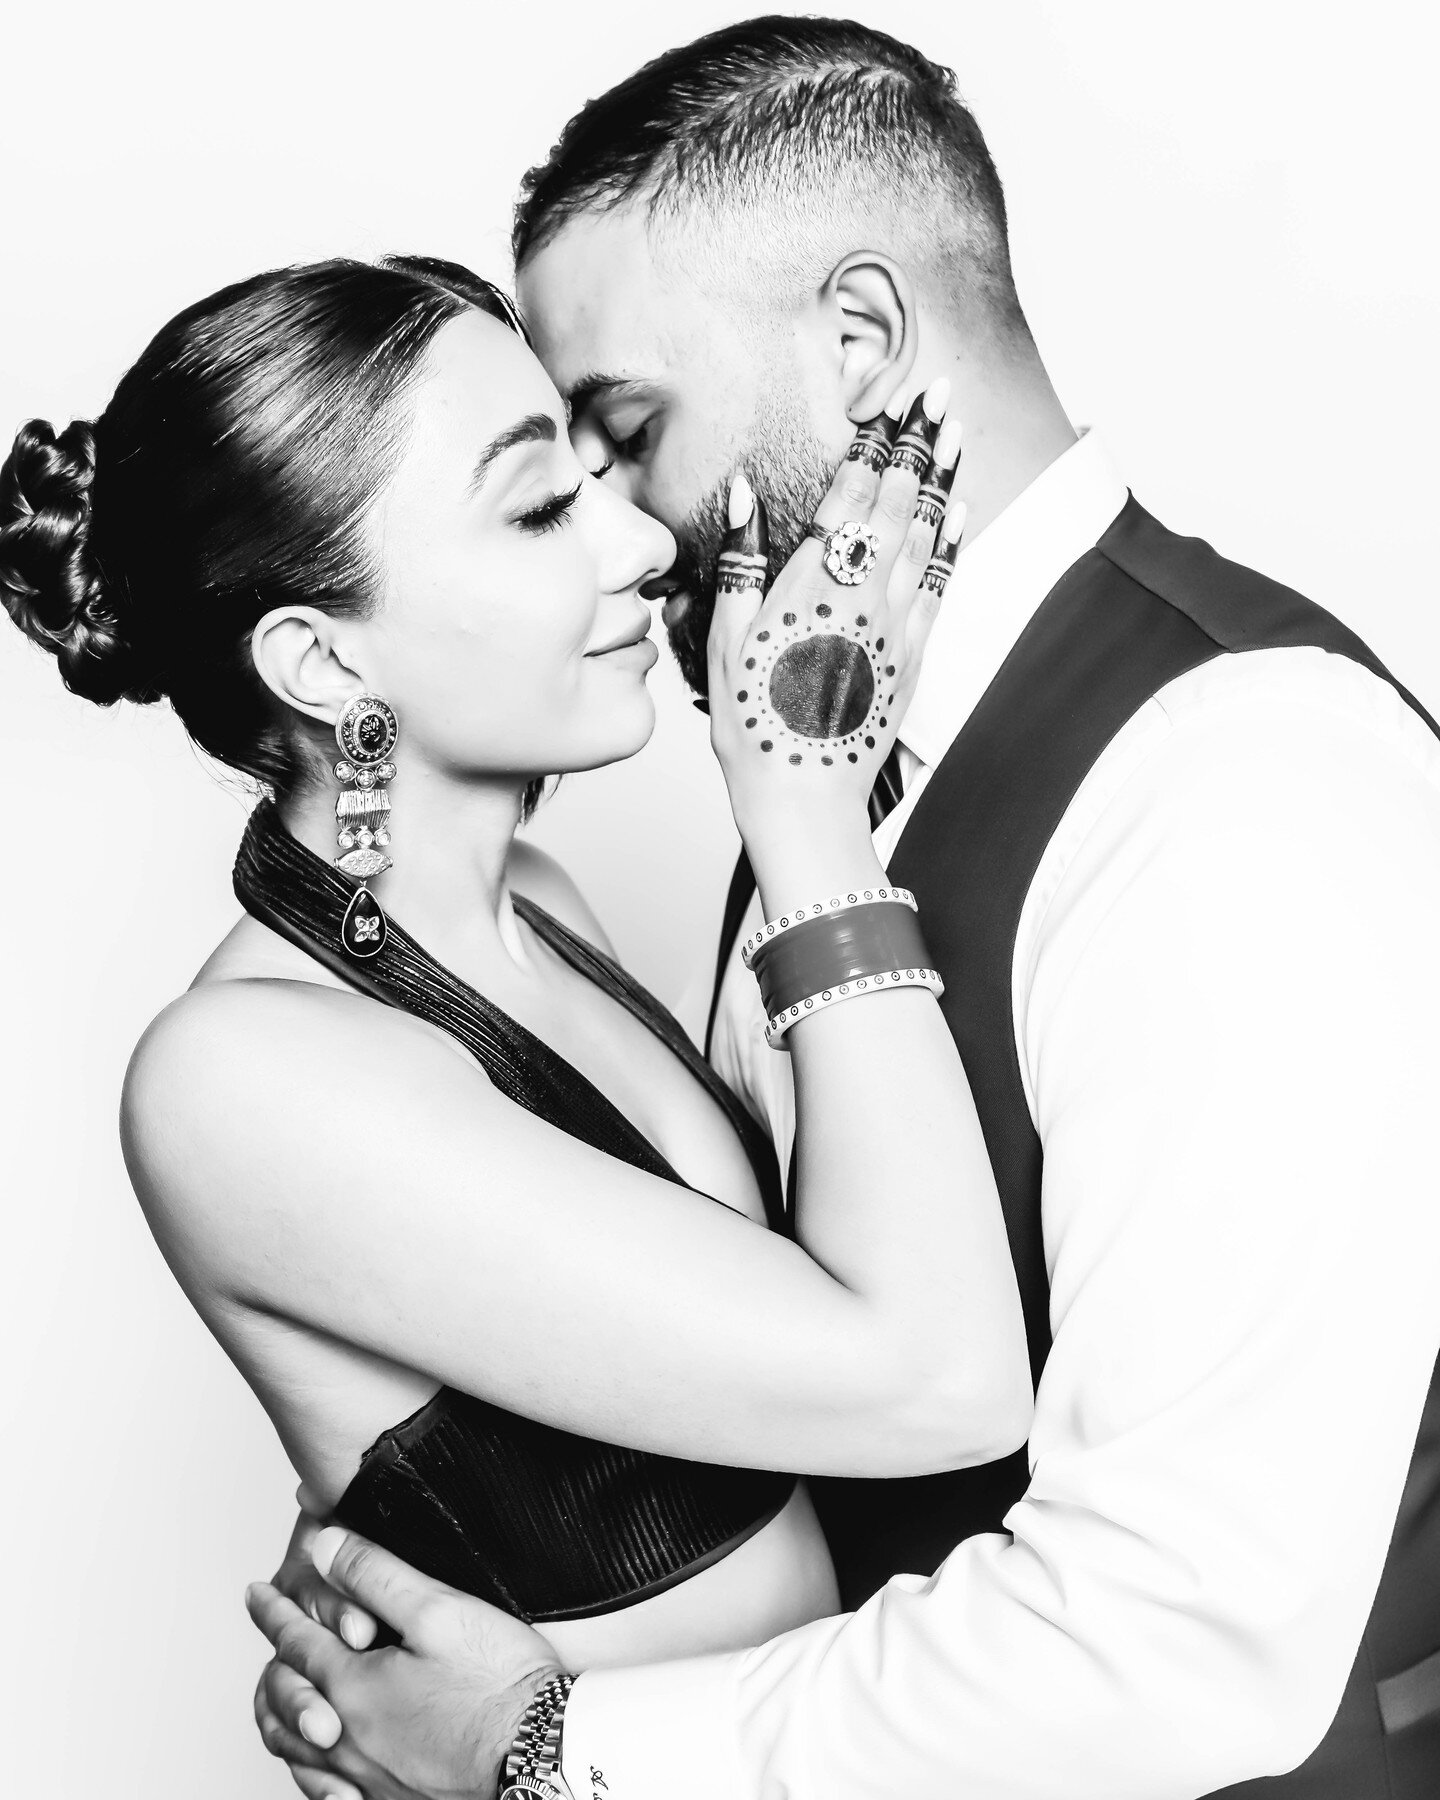 A lovely couple, two hearts beating as one, creating a symphony of love.
.
.
.
#VoguePortraits #blackandwhitephotography #weddingideas #vancity #bcphotographer #vancouverengagement #vancouverweddingphotographer #portraitphotography #indianbride #boll